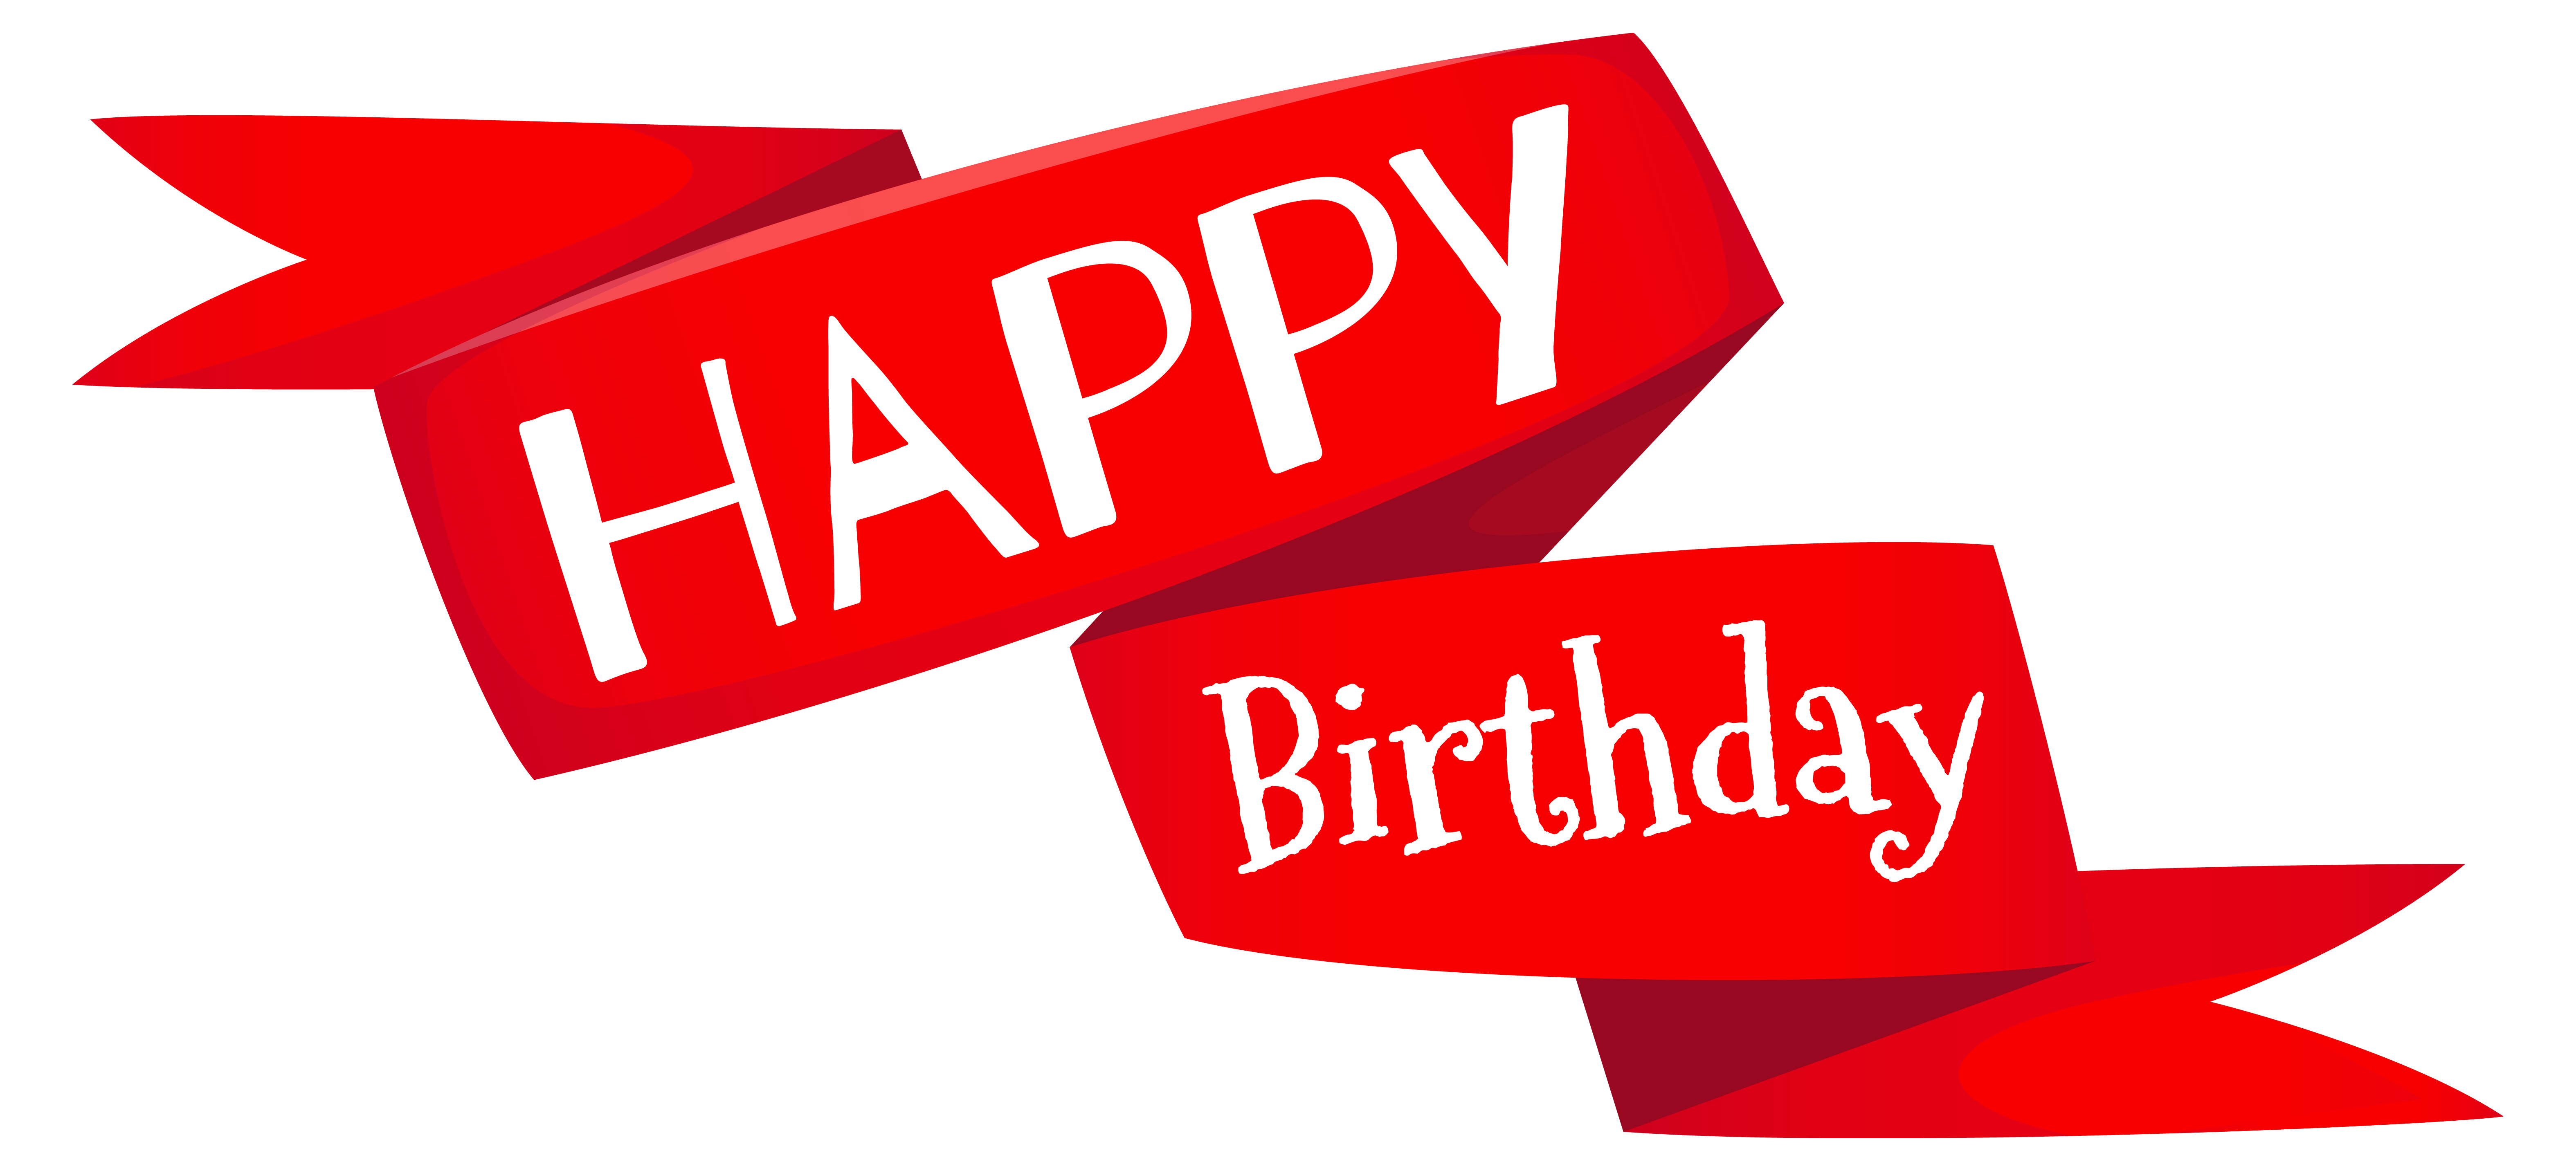 birthday-cake-wish-clip-art-red-happy-birthday-banner-png-image-png